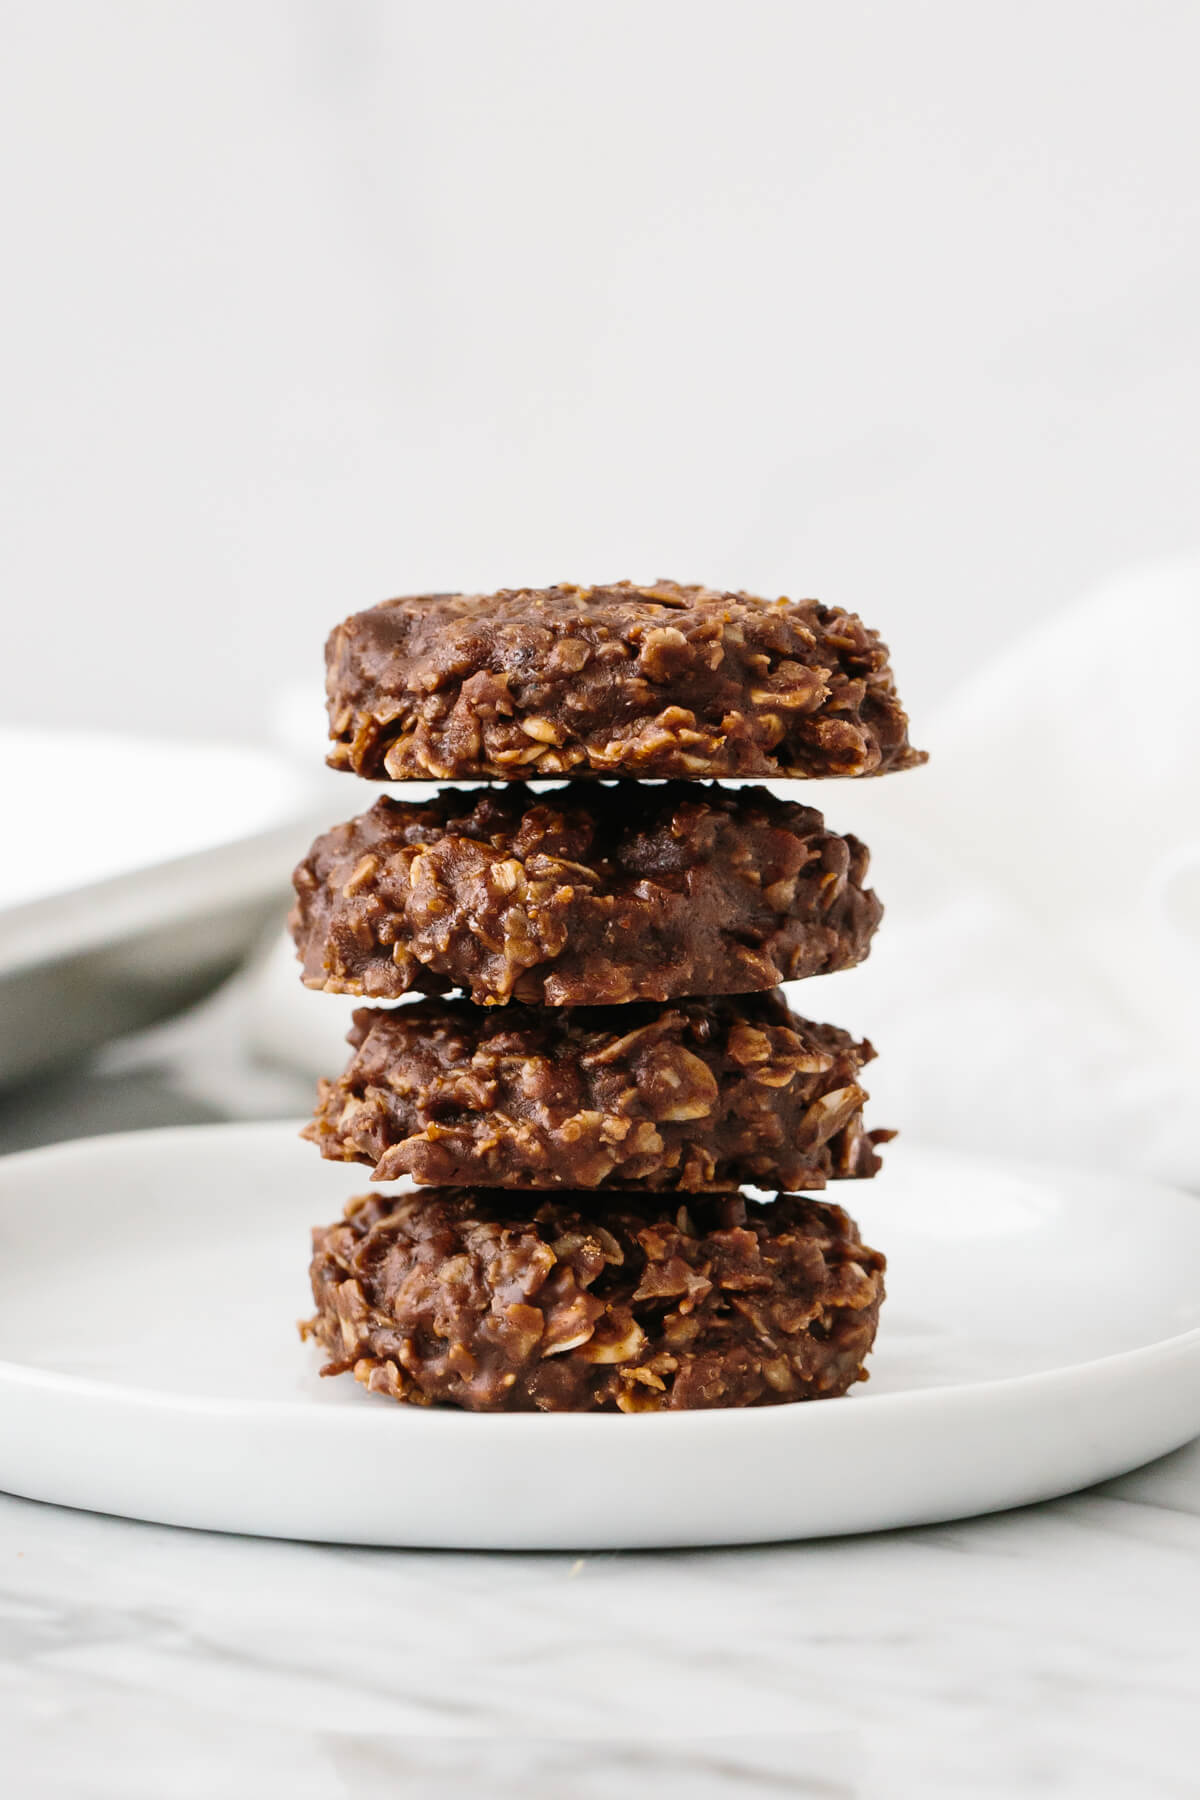 No bake cookies stacked on top of each other on a plate.